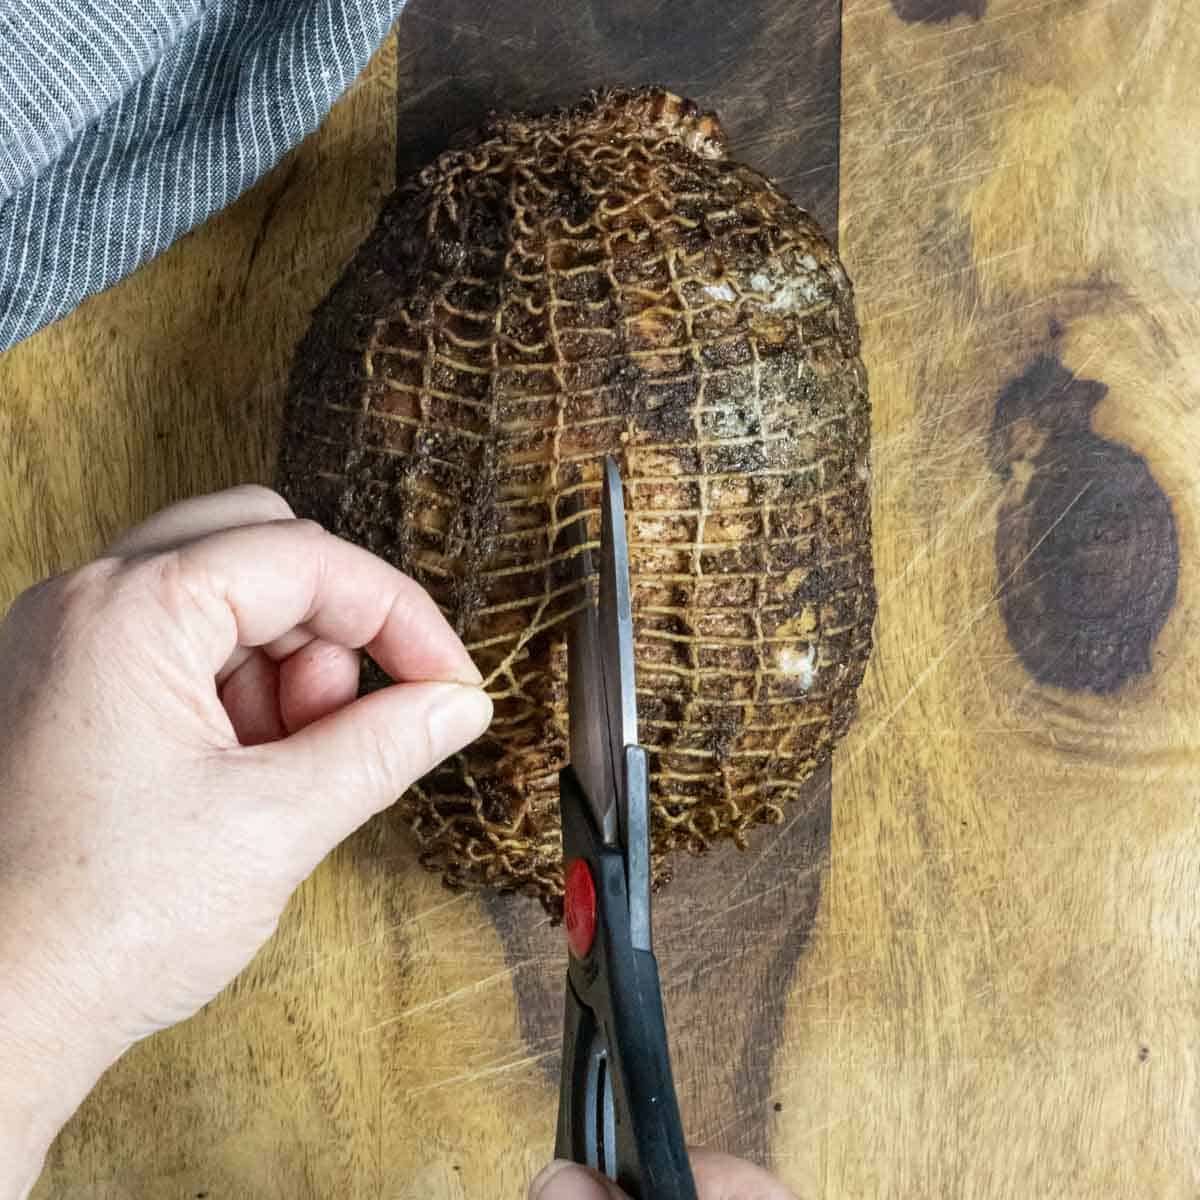 Trimming netting off of finished traeger turkey breast.